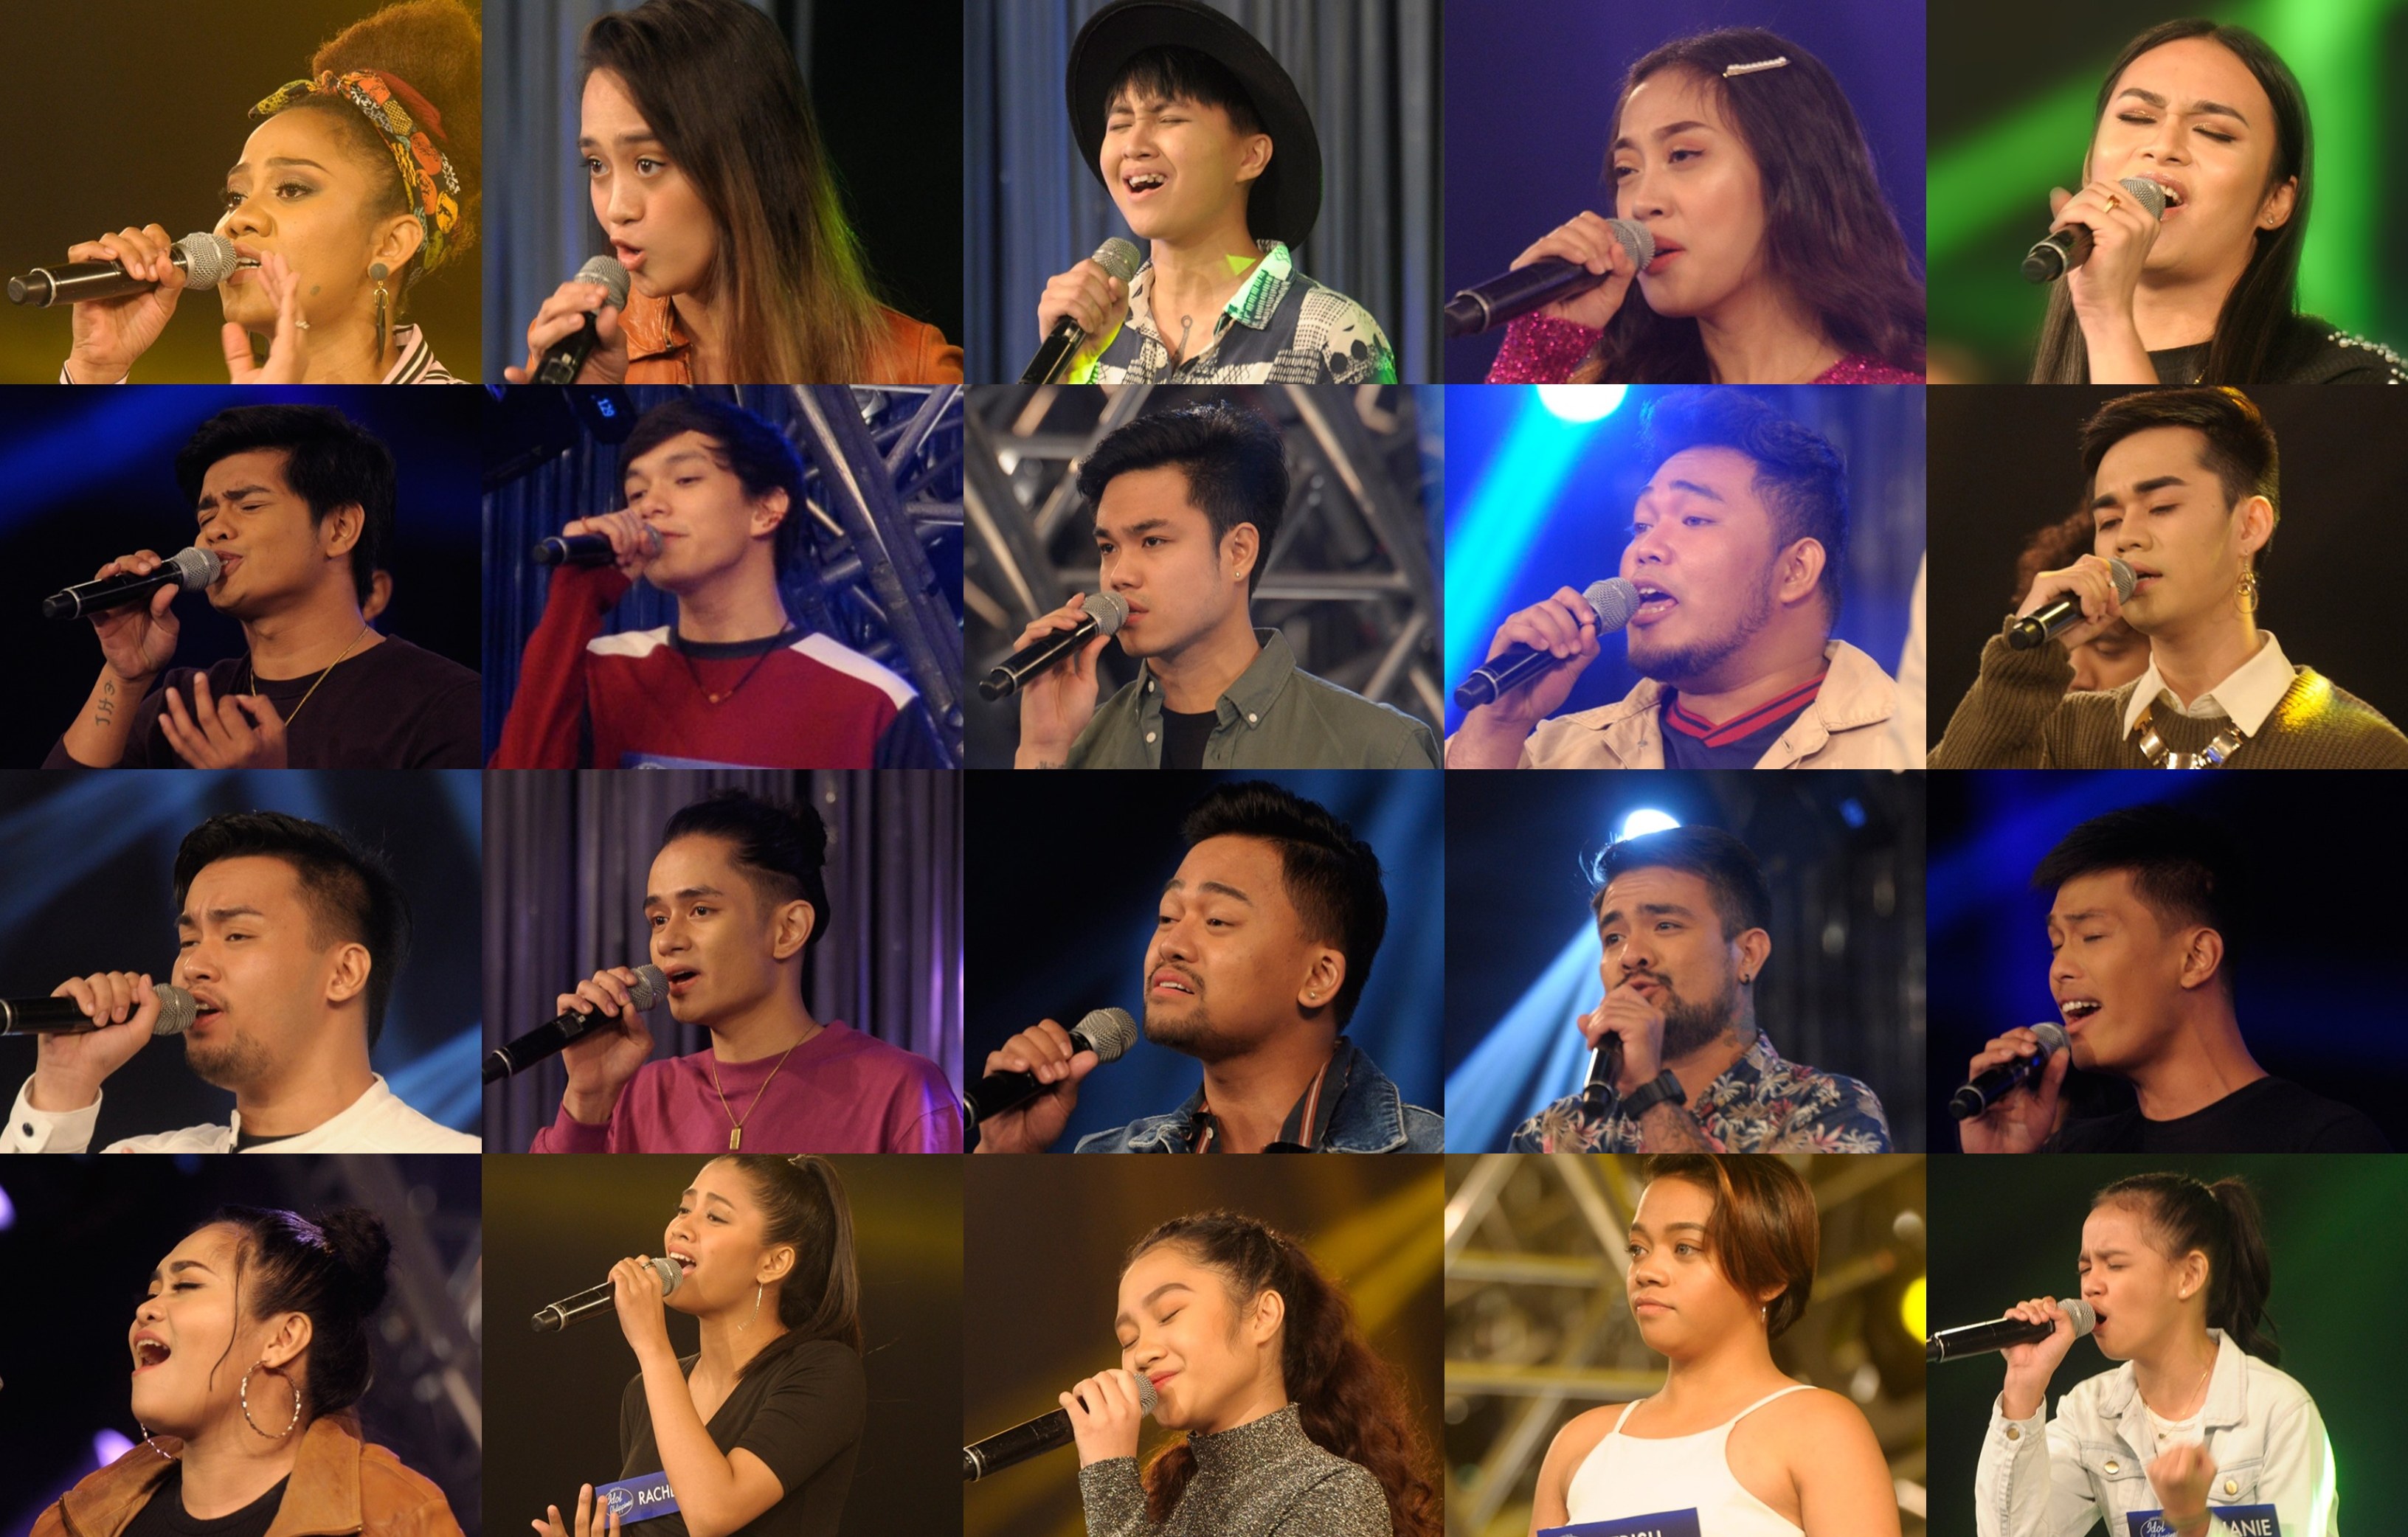 "Idol Philippines" Top 20 inspire with stories of perseverance